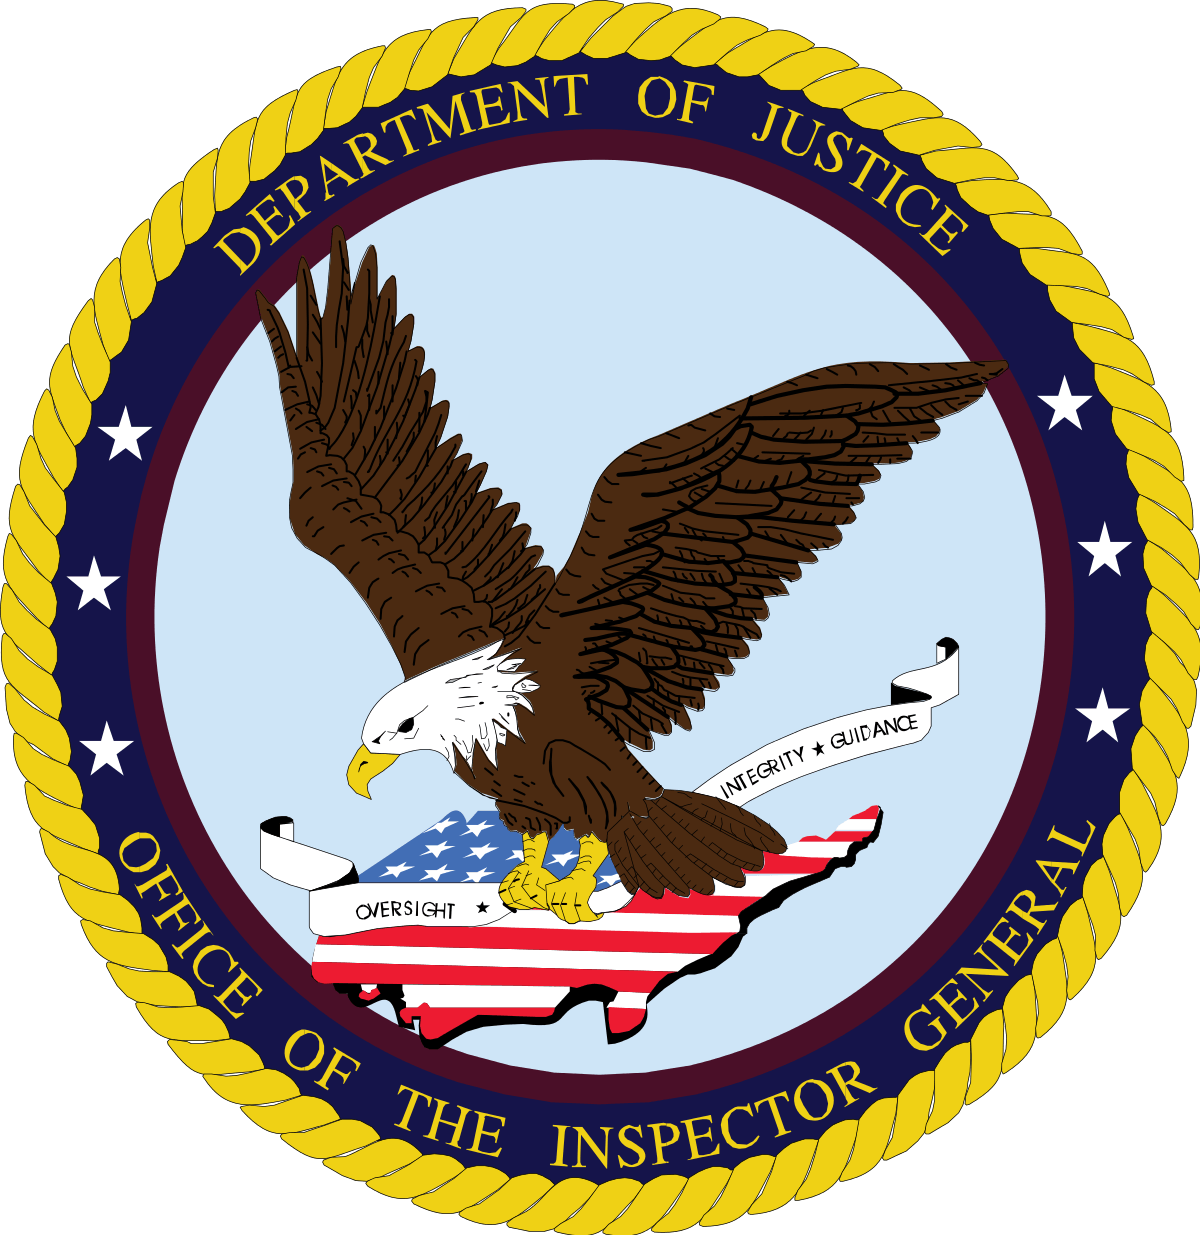 OIG Logo - United States Department of Justice Office of the Inspector General